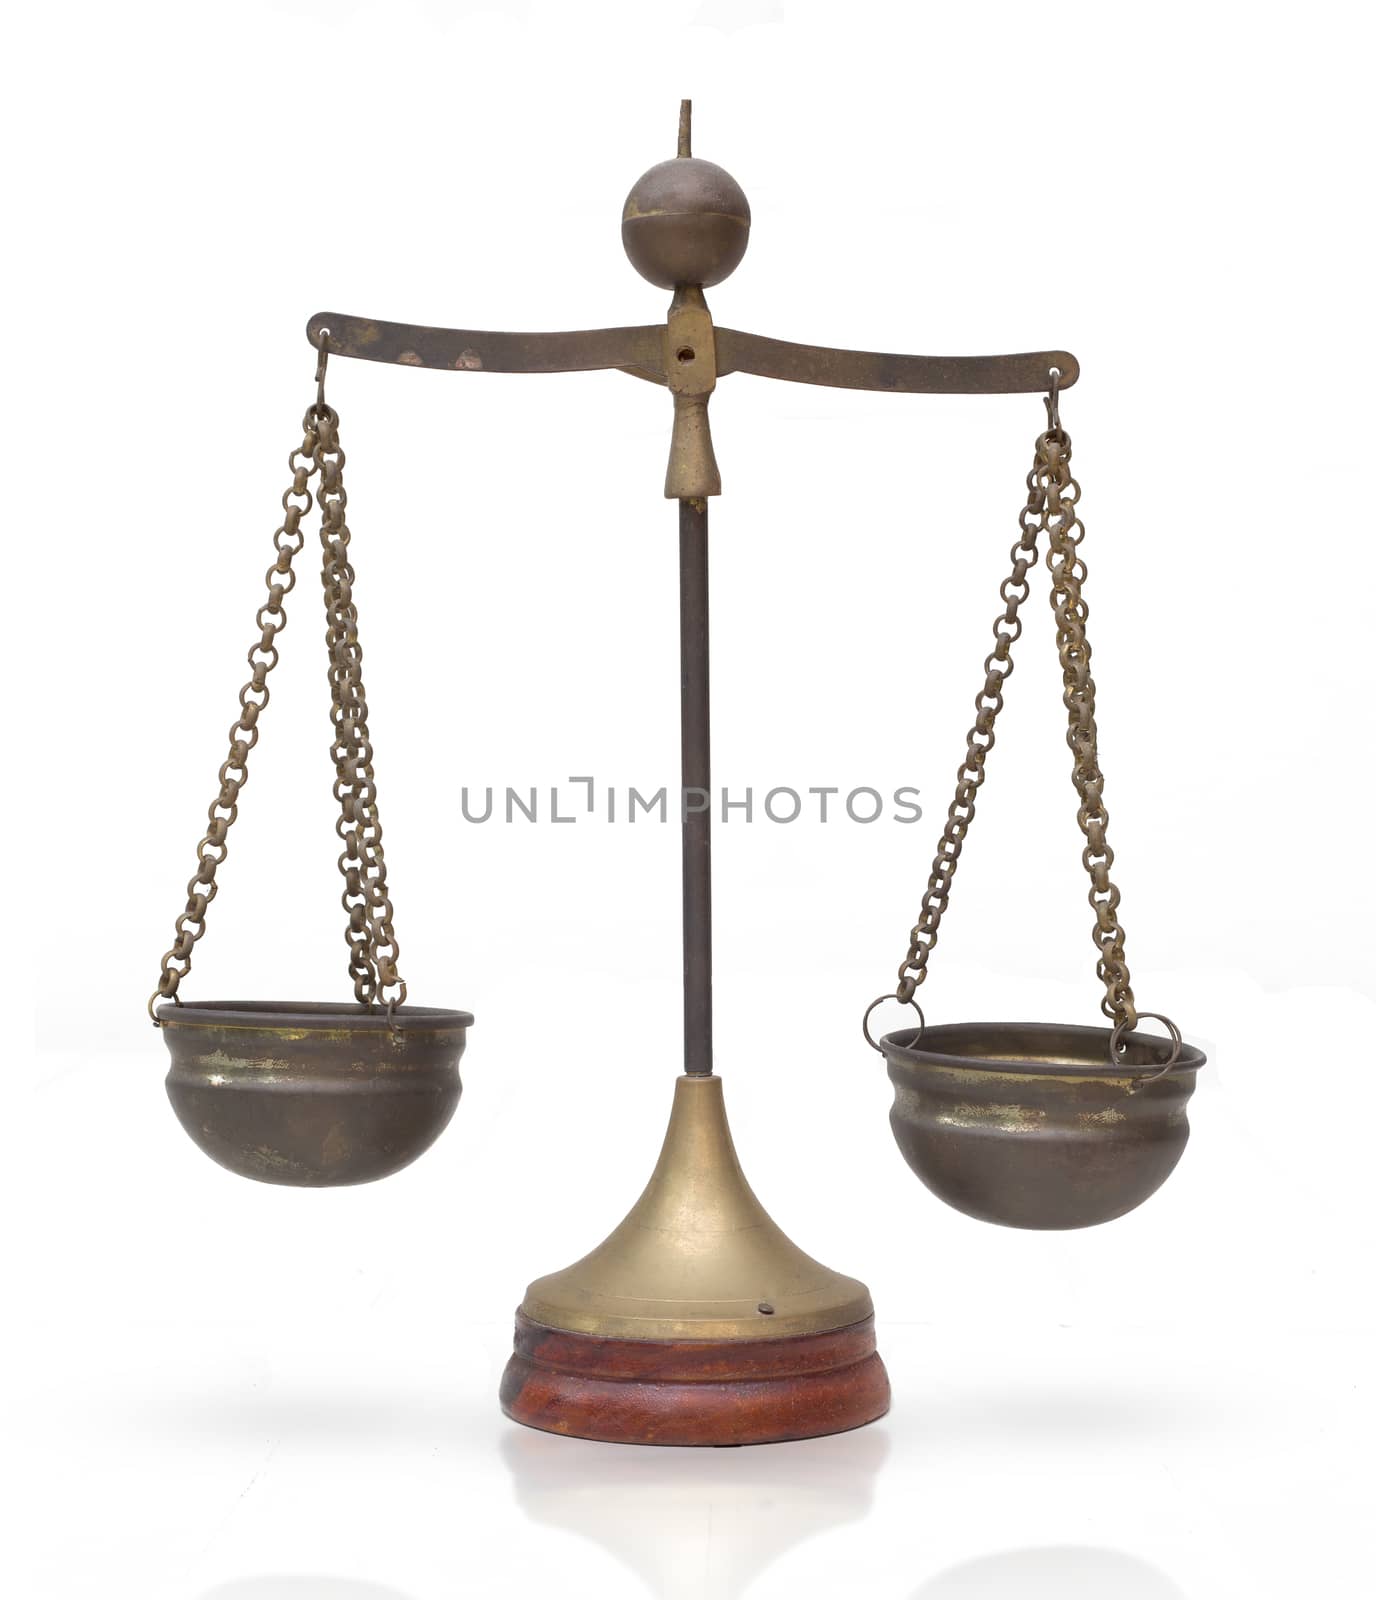 Law scales, Balance Weights : Symbol of justice by jayzynism